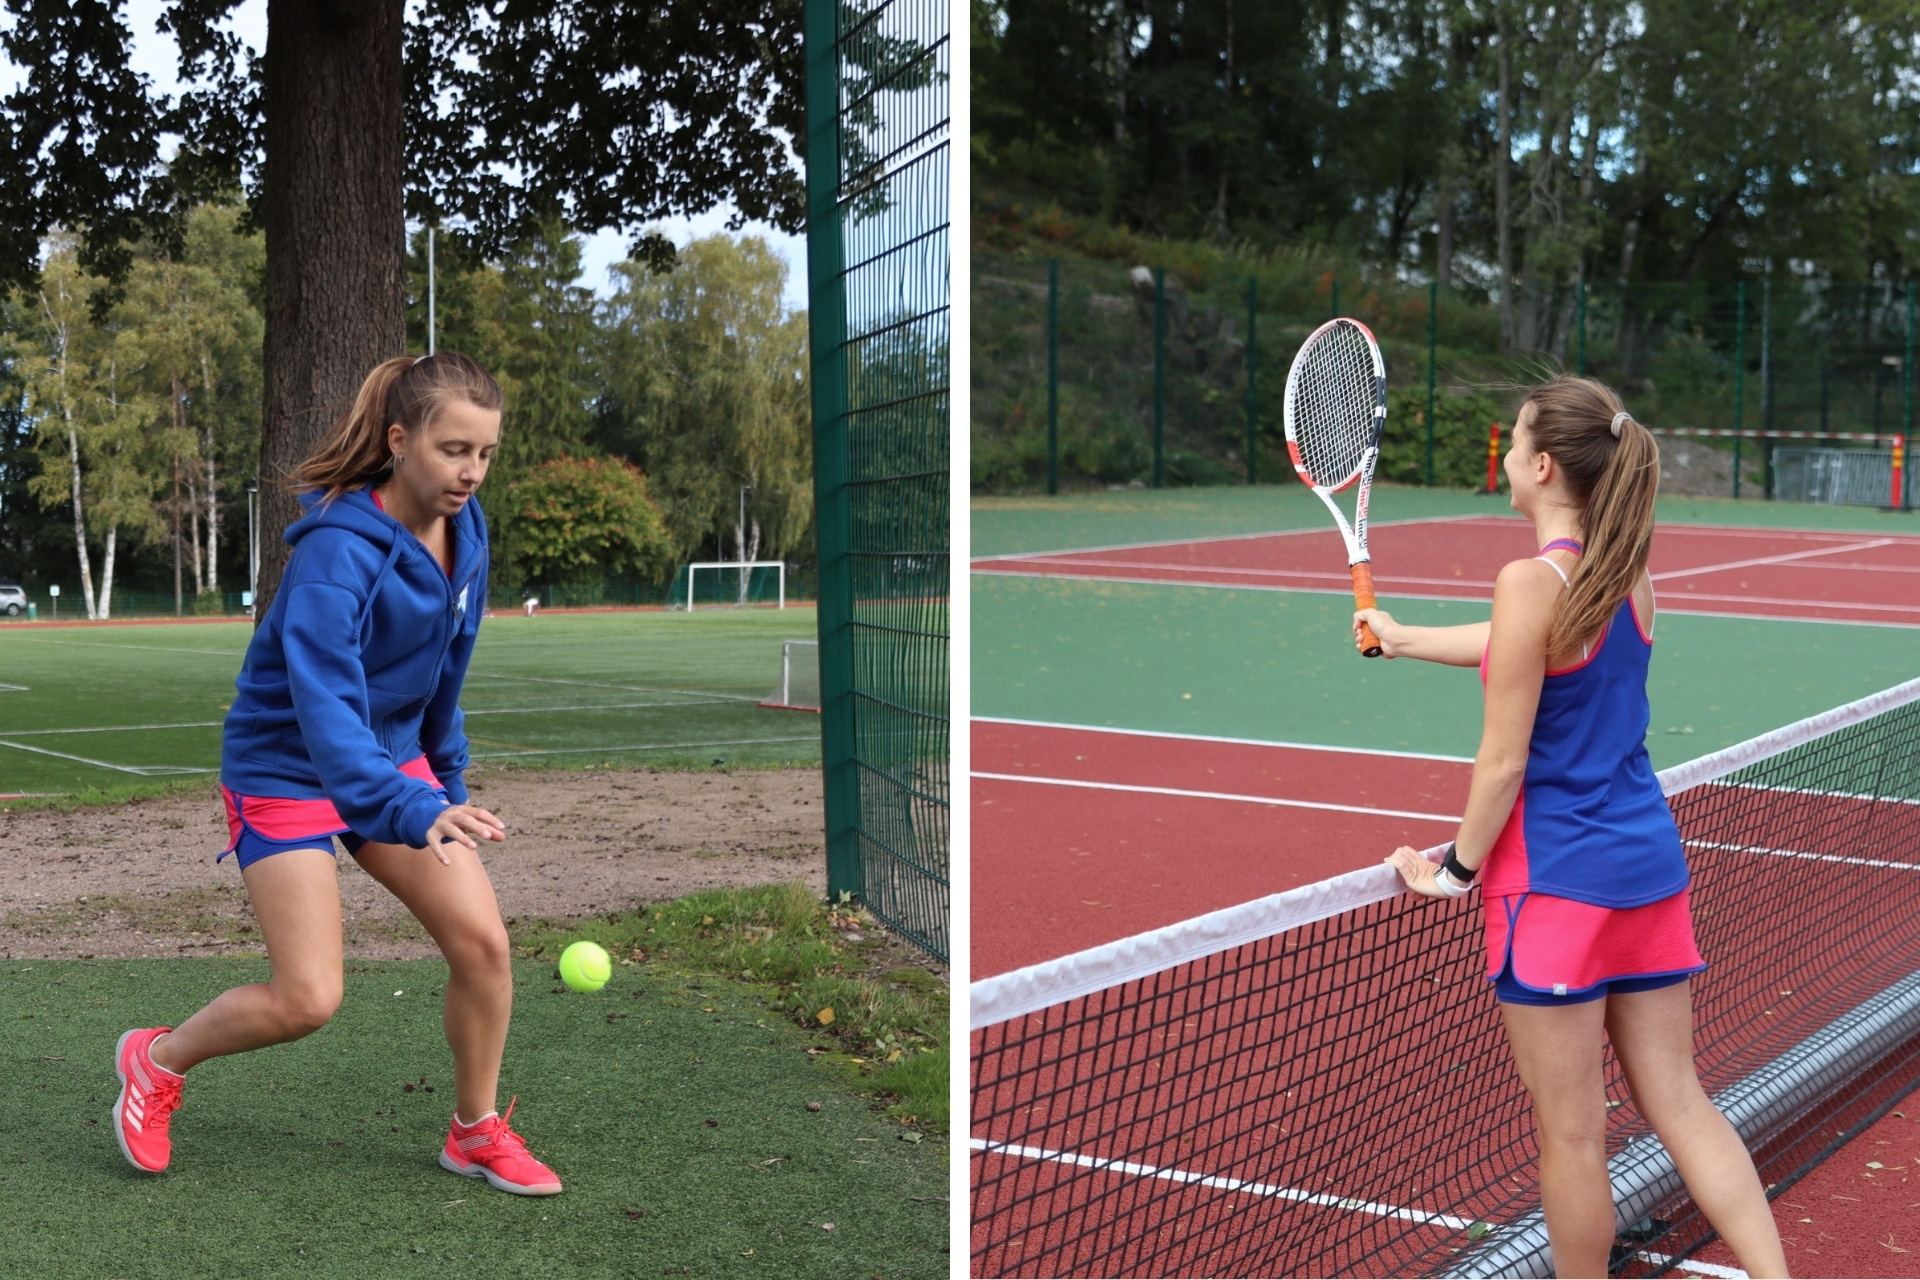 Elena before and after a tennis match